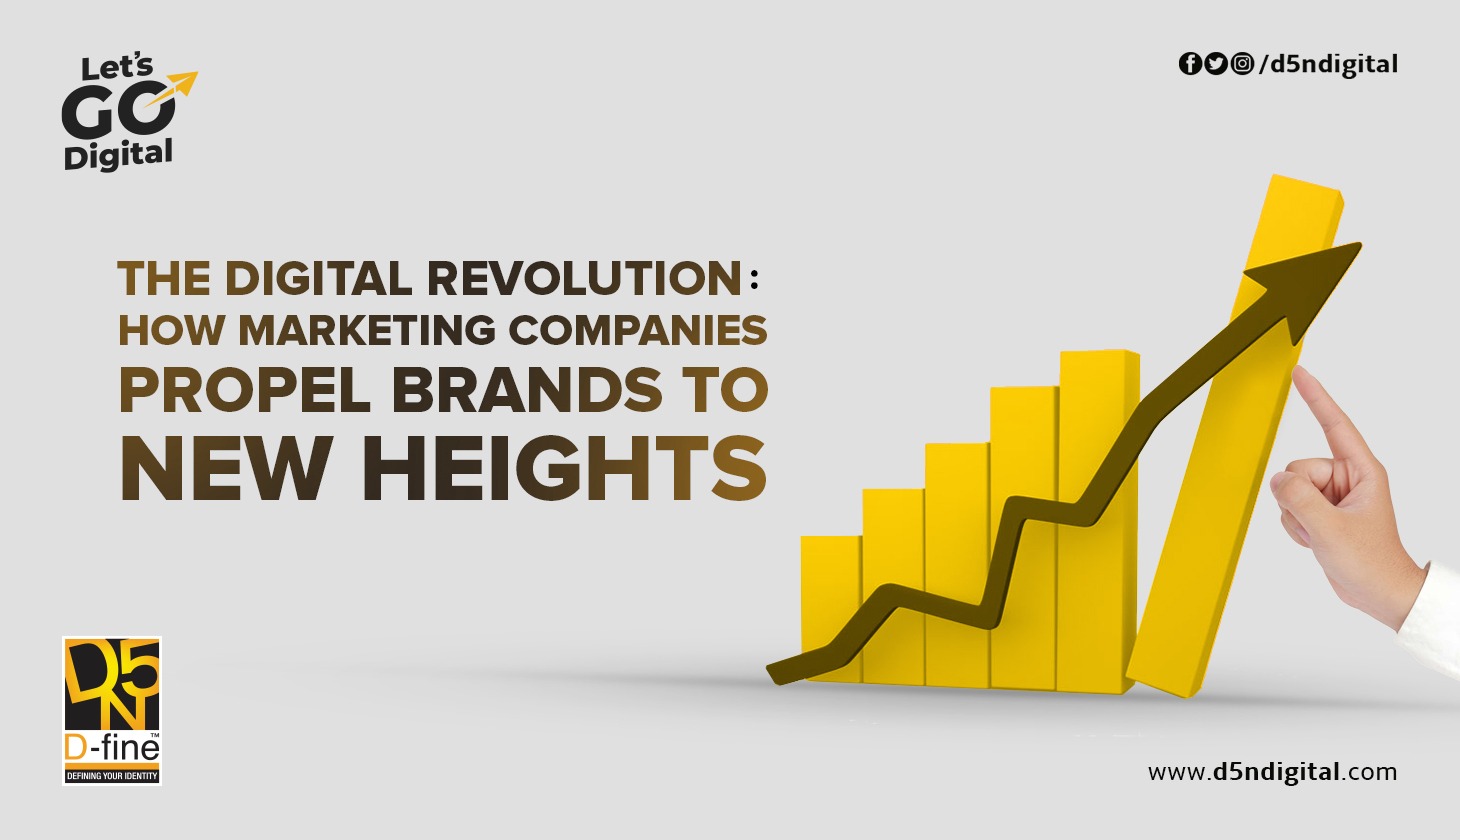 The Digital Revolution: How Marketing Companies Propel Brands to New Heights.